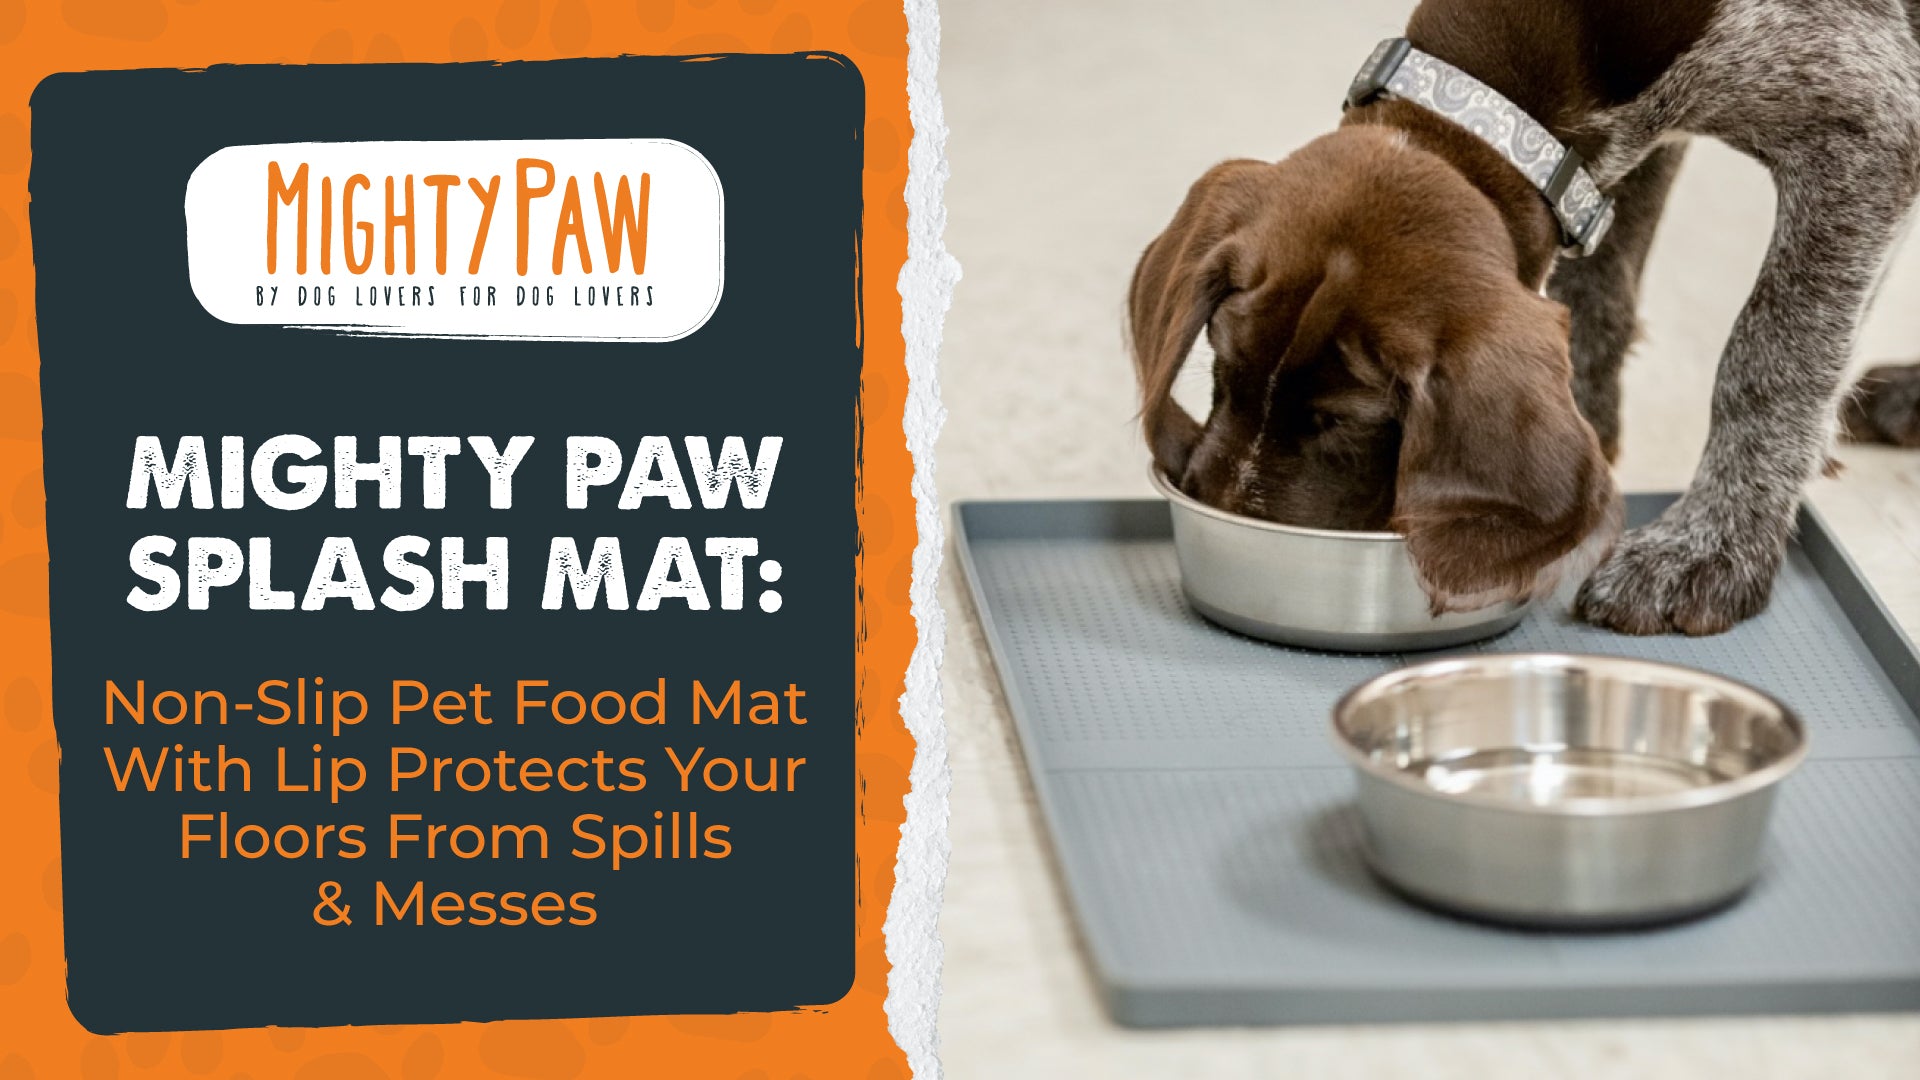 Mighty Paw Splash Mat: Non-Slip Pet Food Mat With Lip Protects Your Floors From Spills & Messes